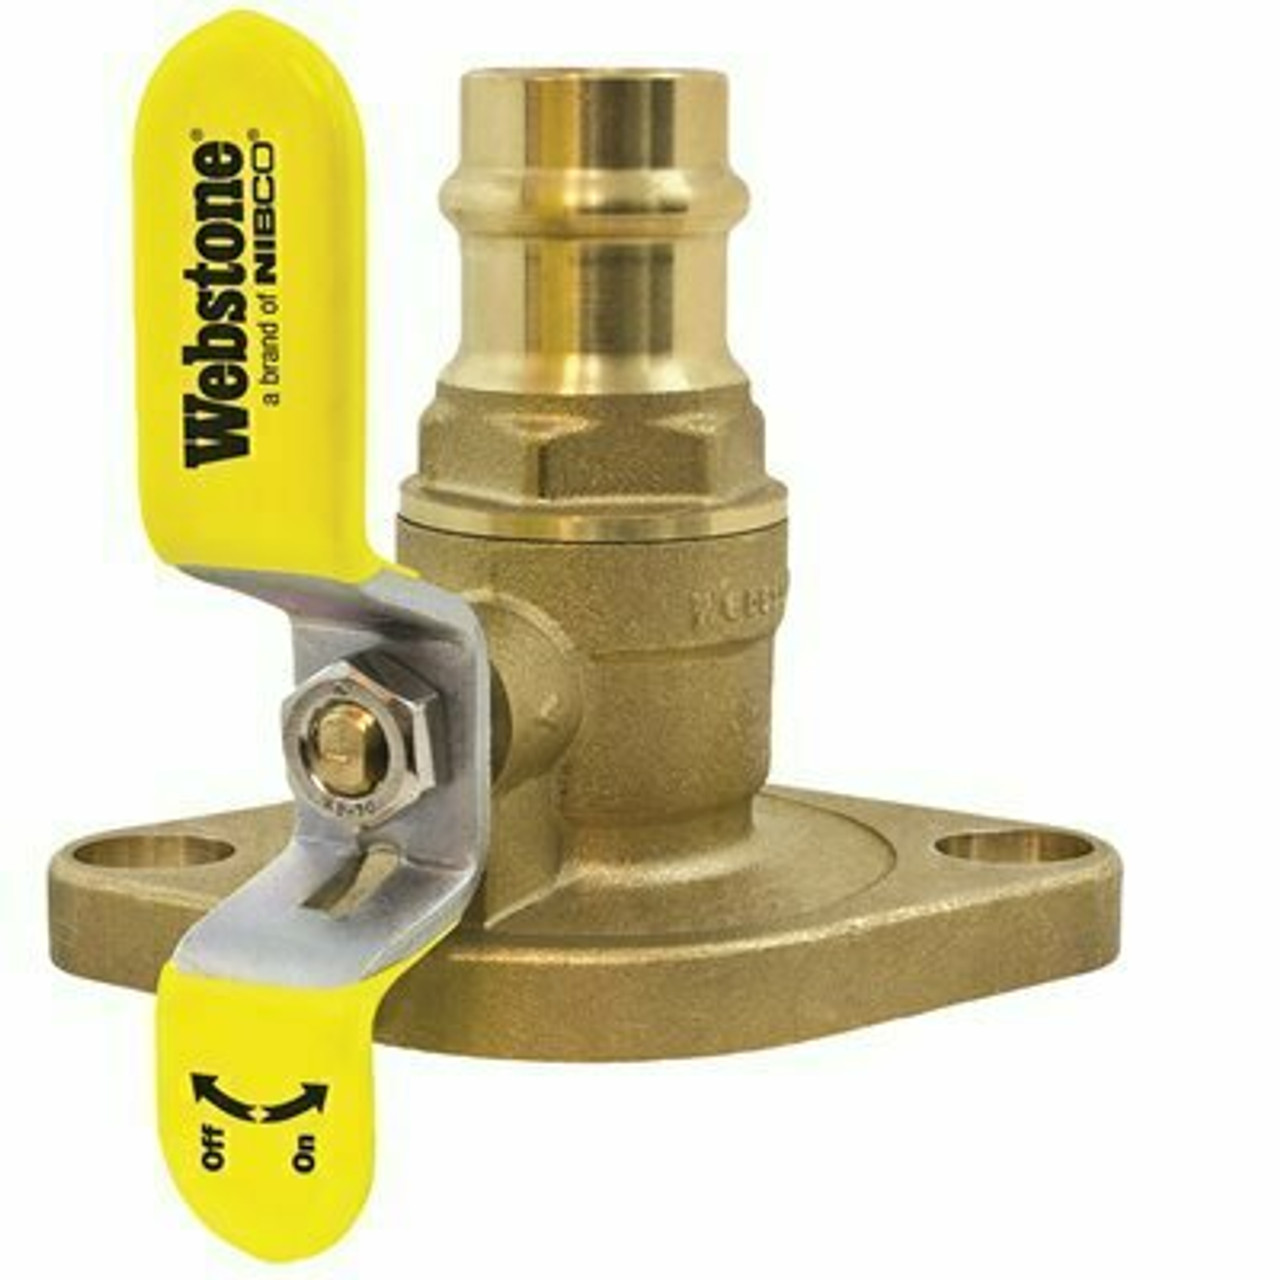 Nibco 1-1/4 In. Forged Brass Press Rotating Flange High Velocity Ball Valve With Adjustable Packing Glands